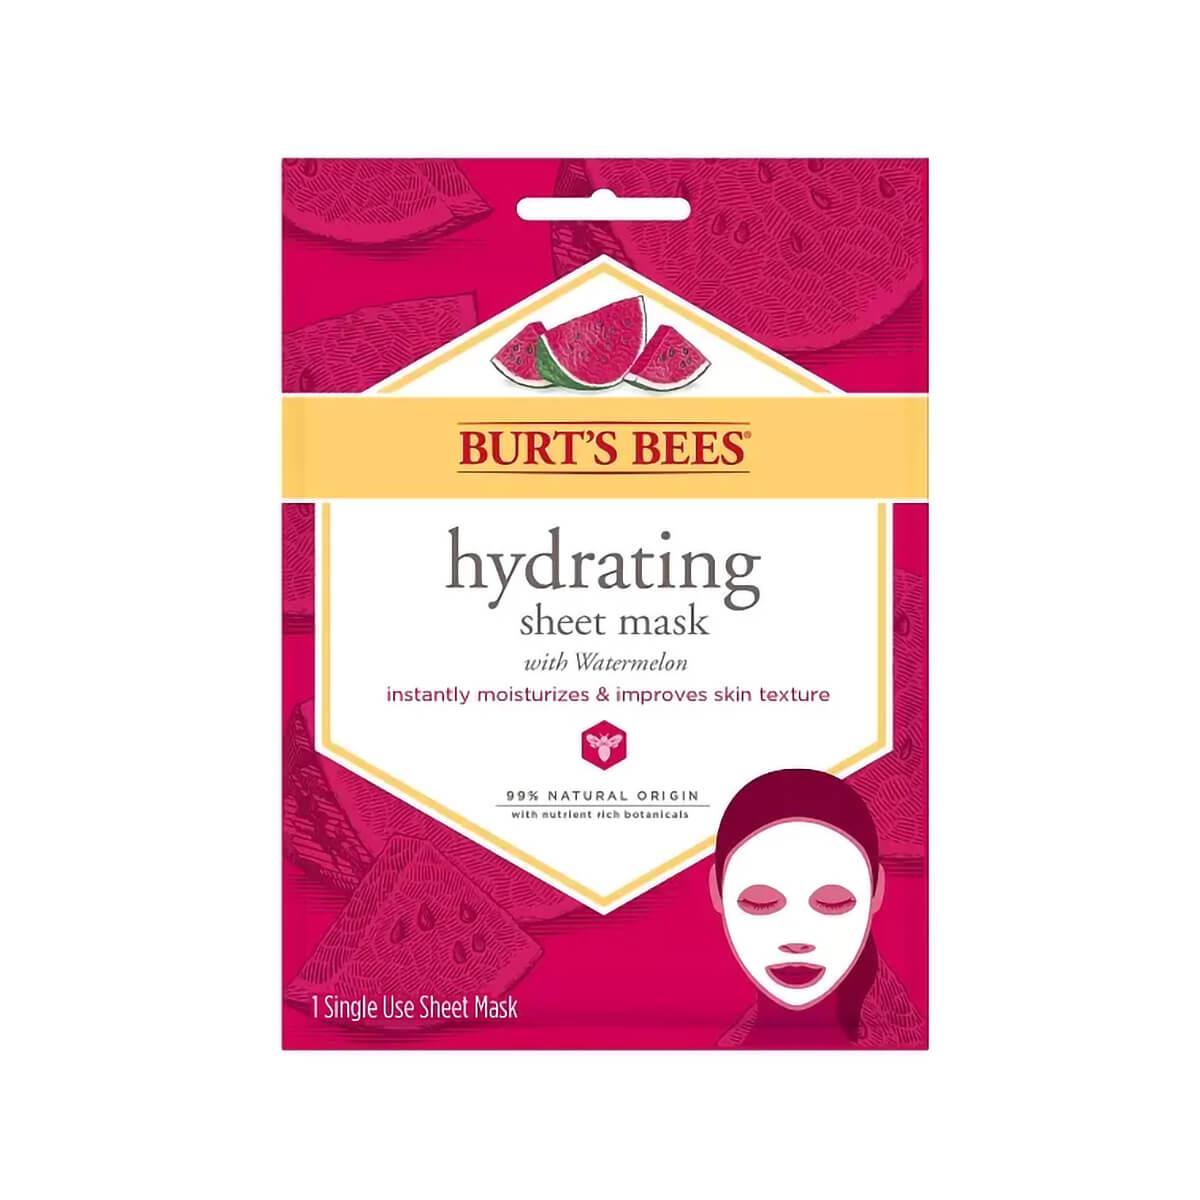  Hydrating Sheet Mask With Watermelon